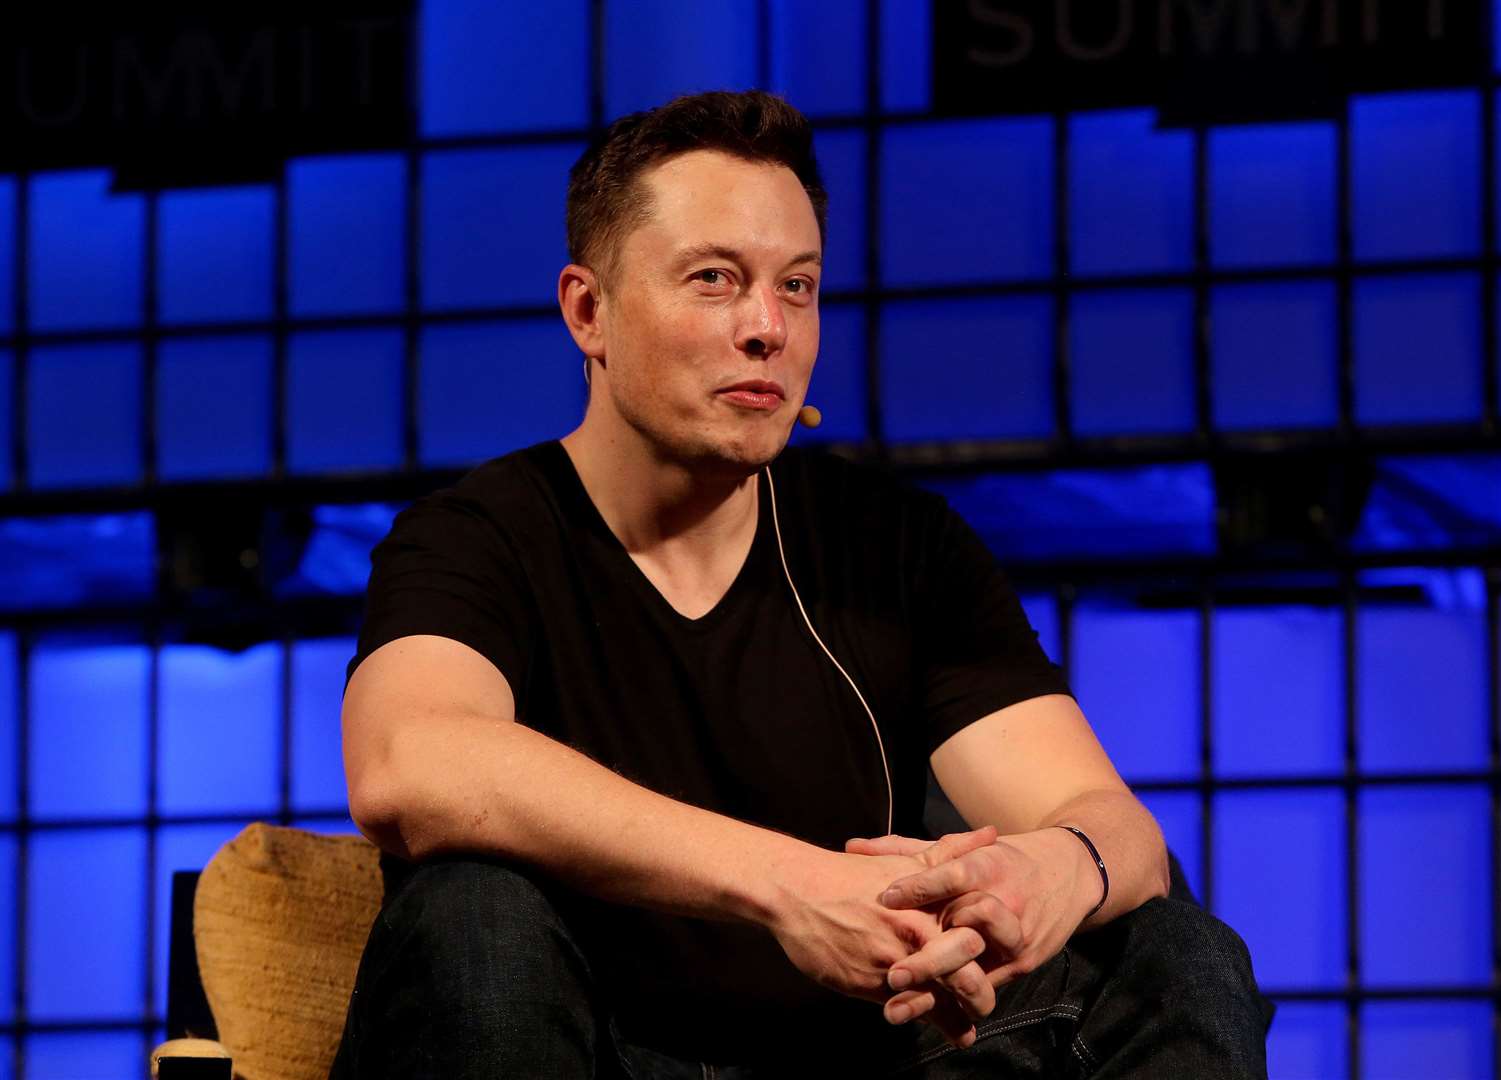 Elon Musk described the bill as “very concerning” (Brian Lawless/PA).